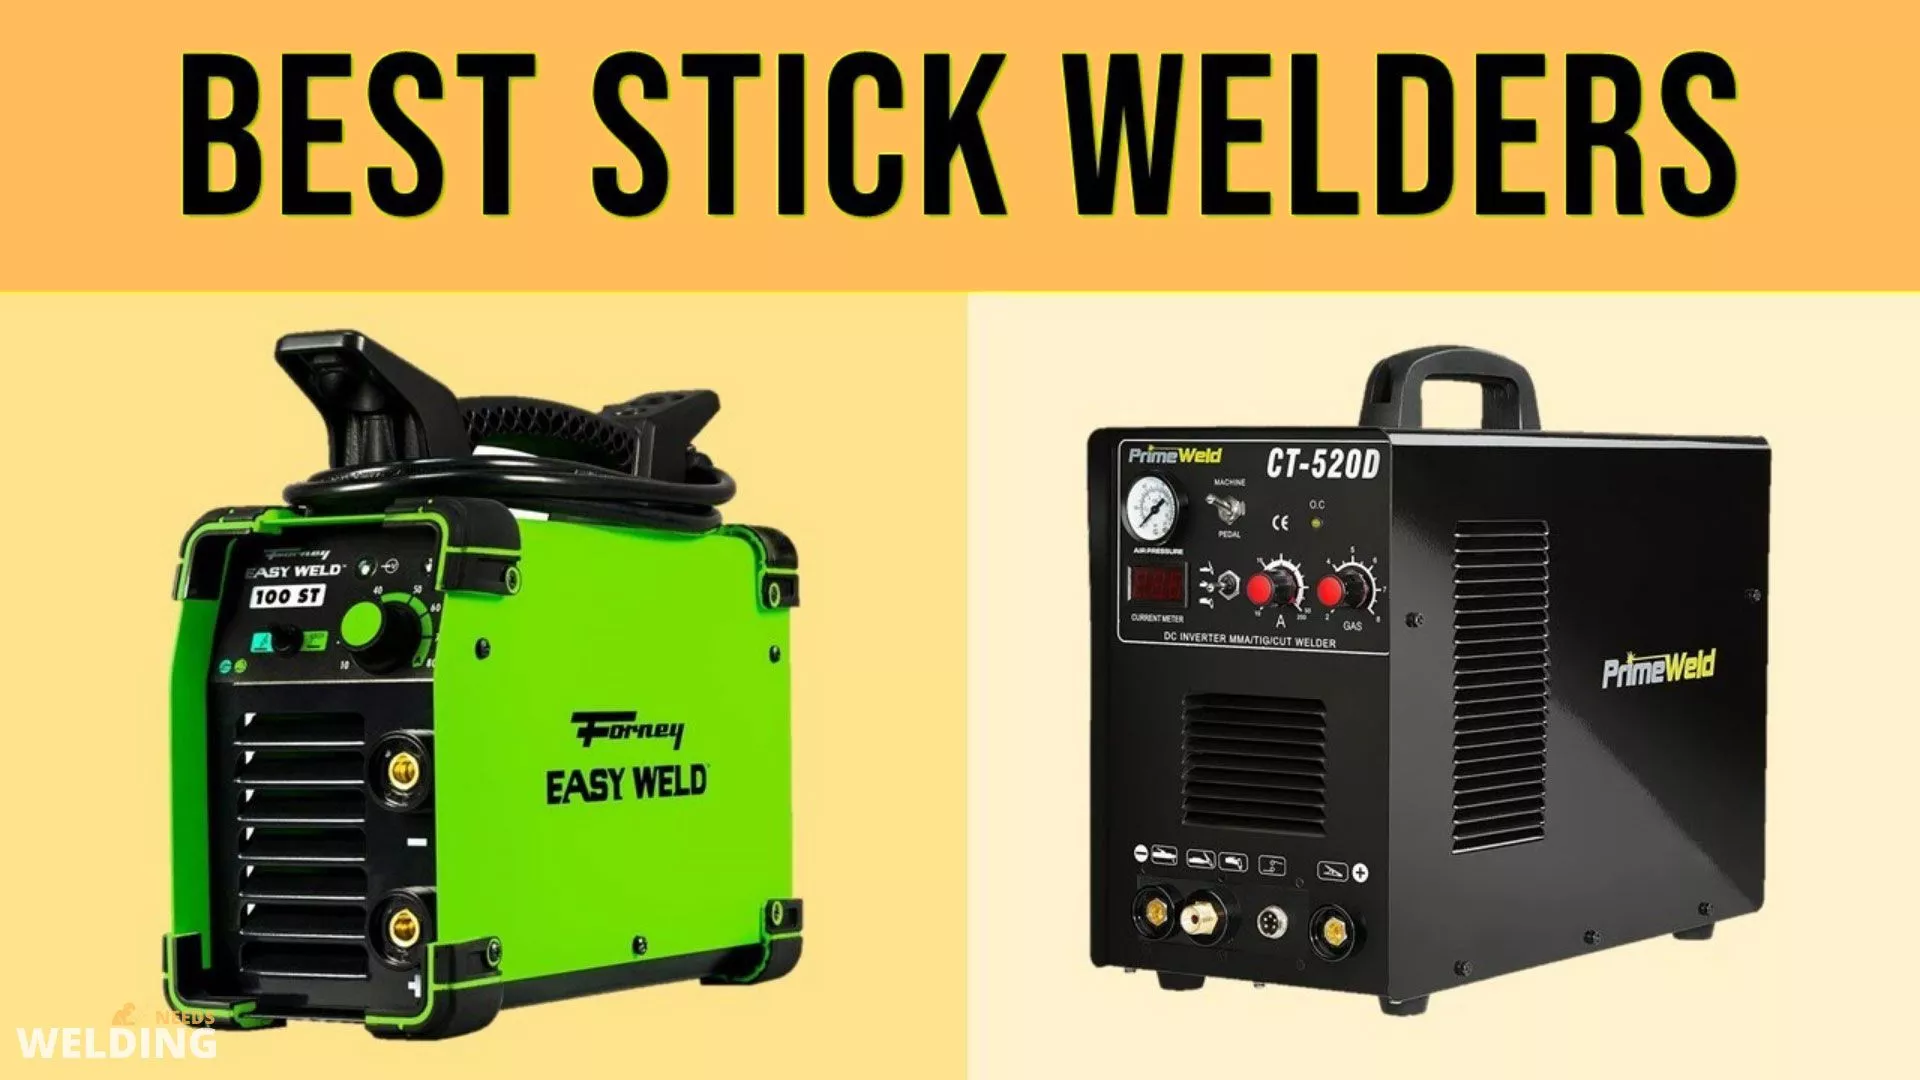 Best SMAW (Shielded Metal Arc Welding) A.K.A MMA or Stick Welding Machines in India